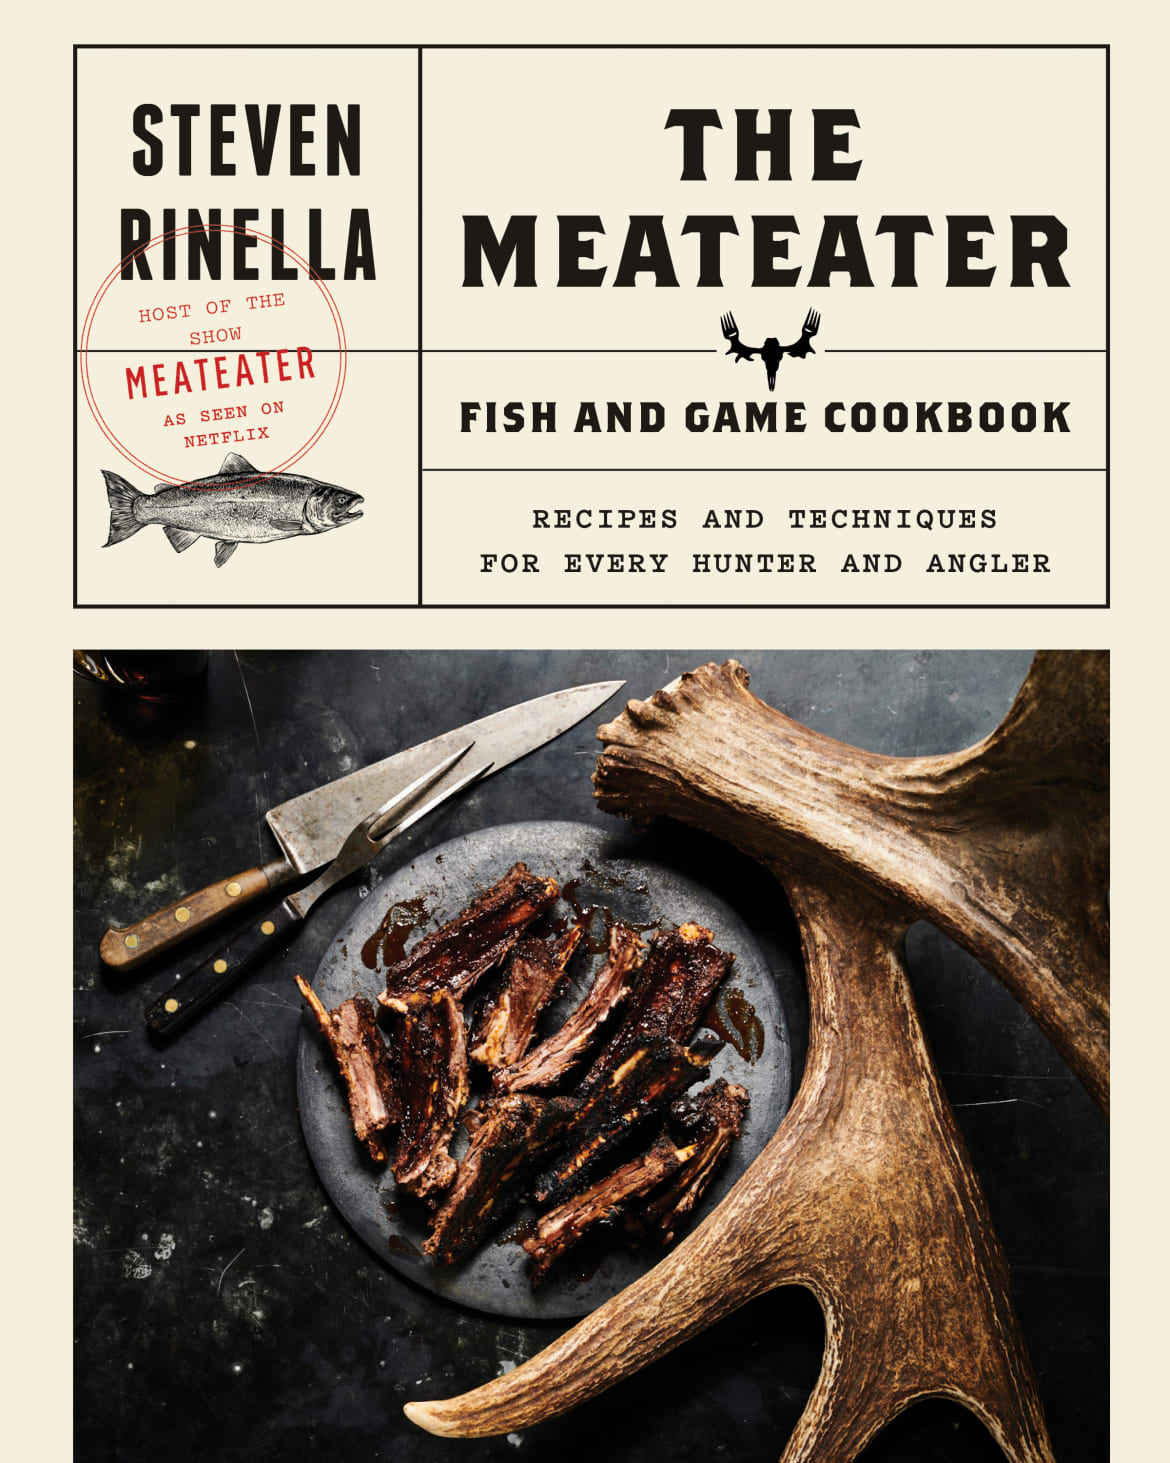 190203-rothbaum-MEATEATER-embed_ubgyef